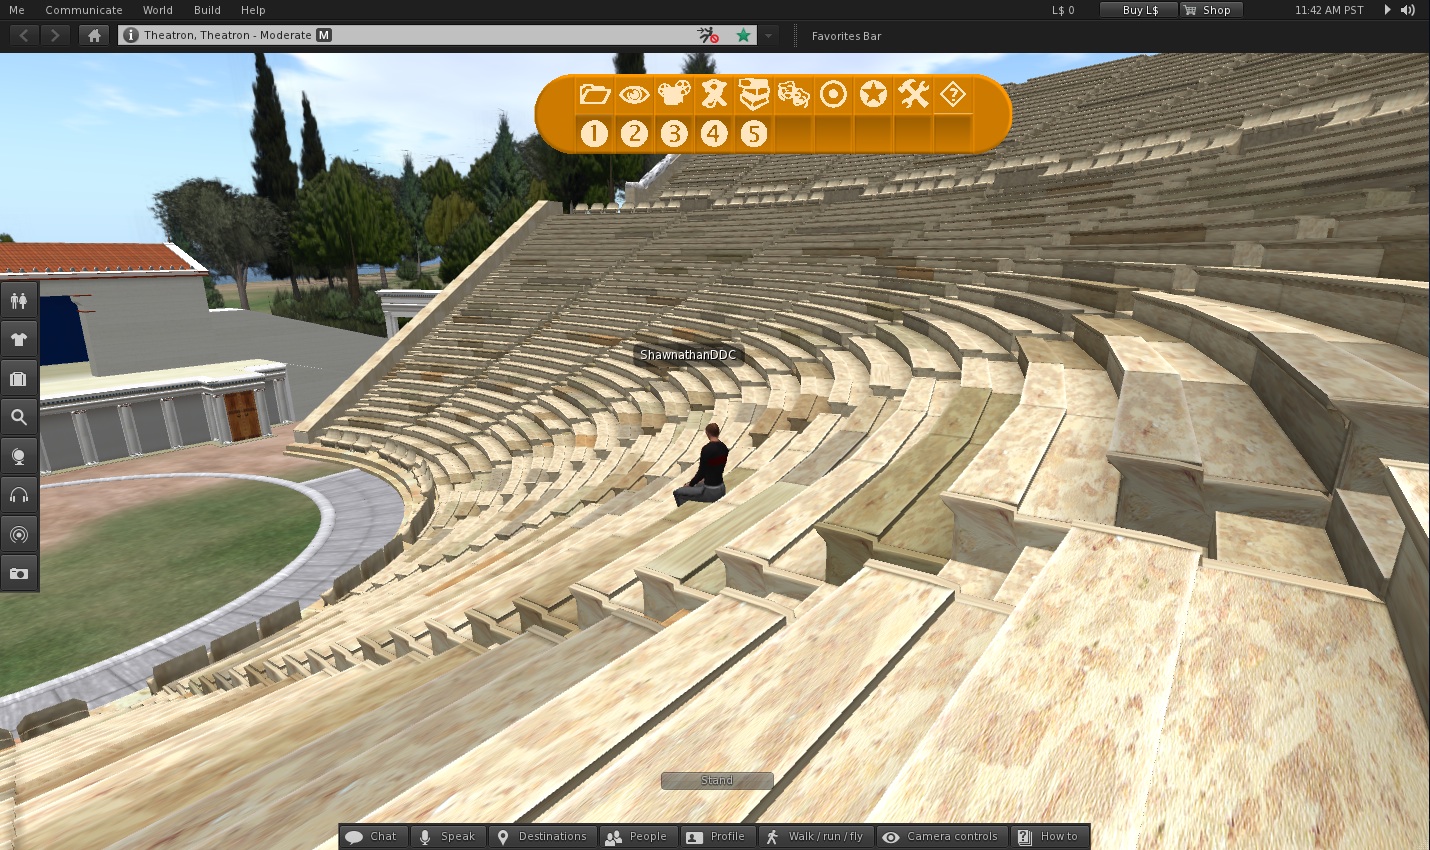 Theatron3’s Theatre of Dionysos in Second Life. The heads up display (HUD) offers numbered data points containing information about the model.